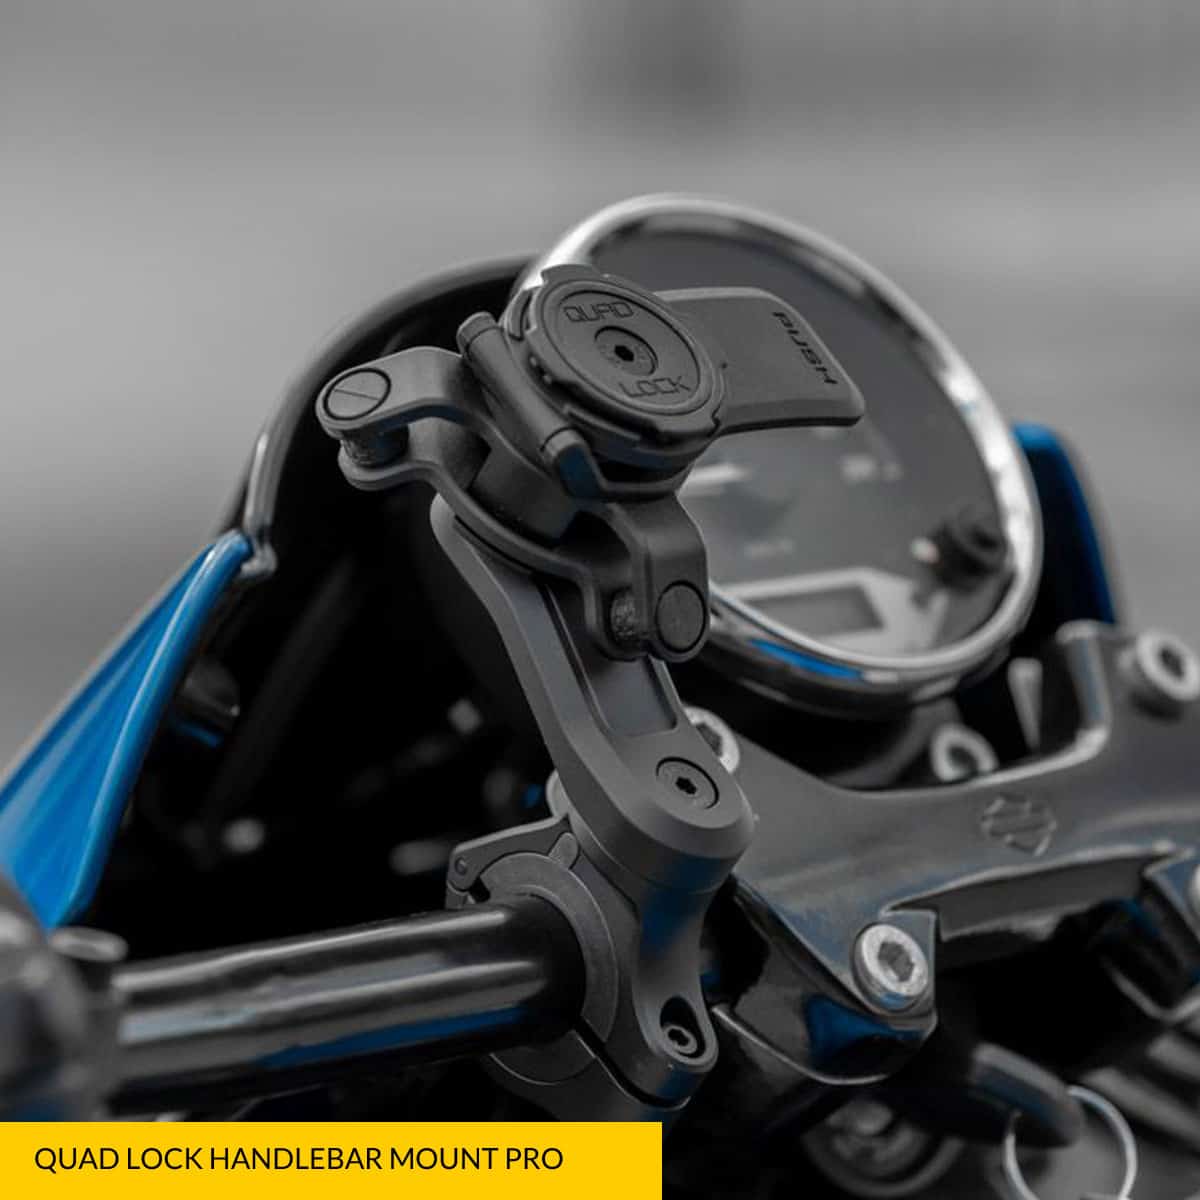 Quad Lock Handlebar Mount: "Unit is great, easy to install, holds phone secure and easily adjusted to view when riding."